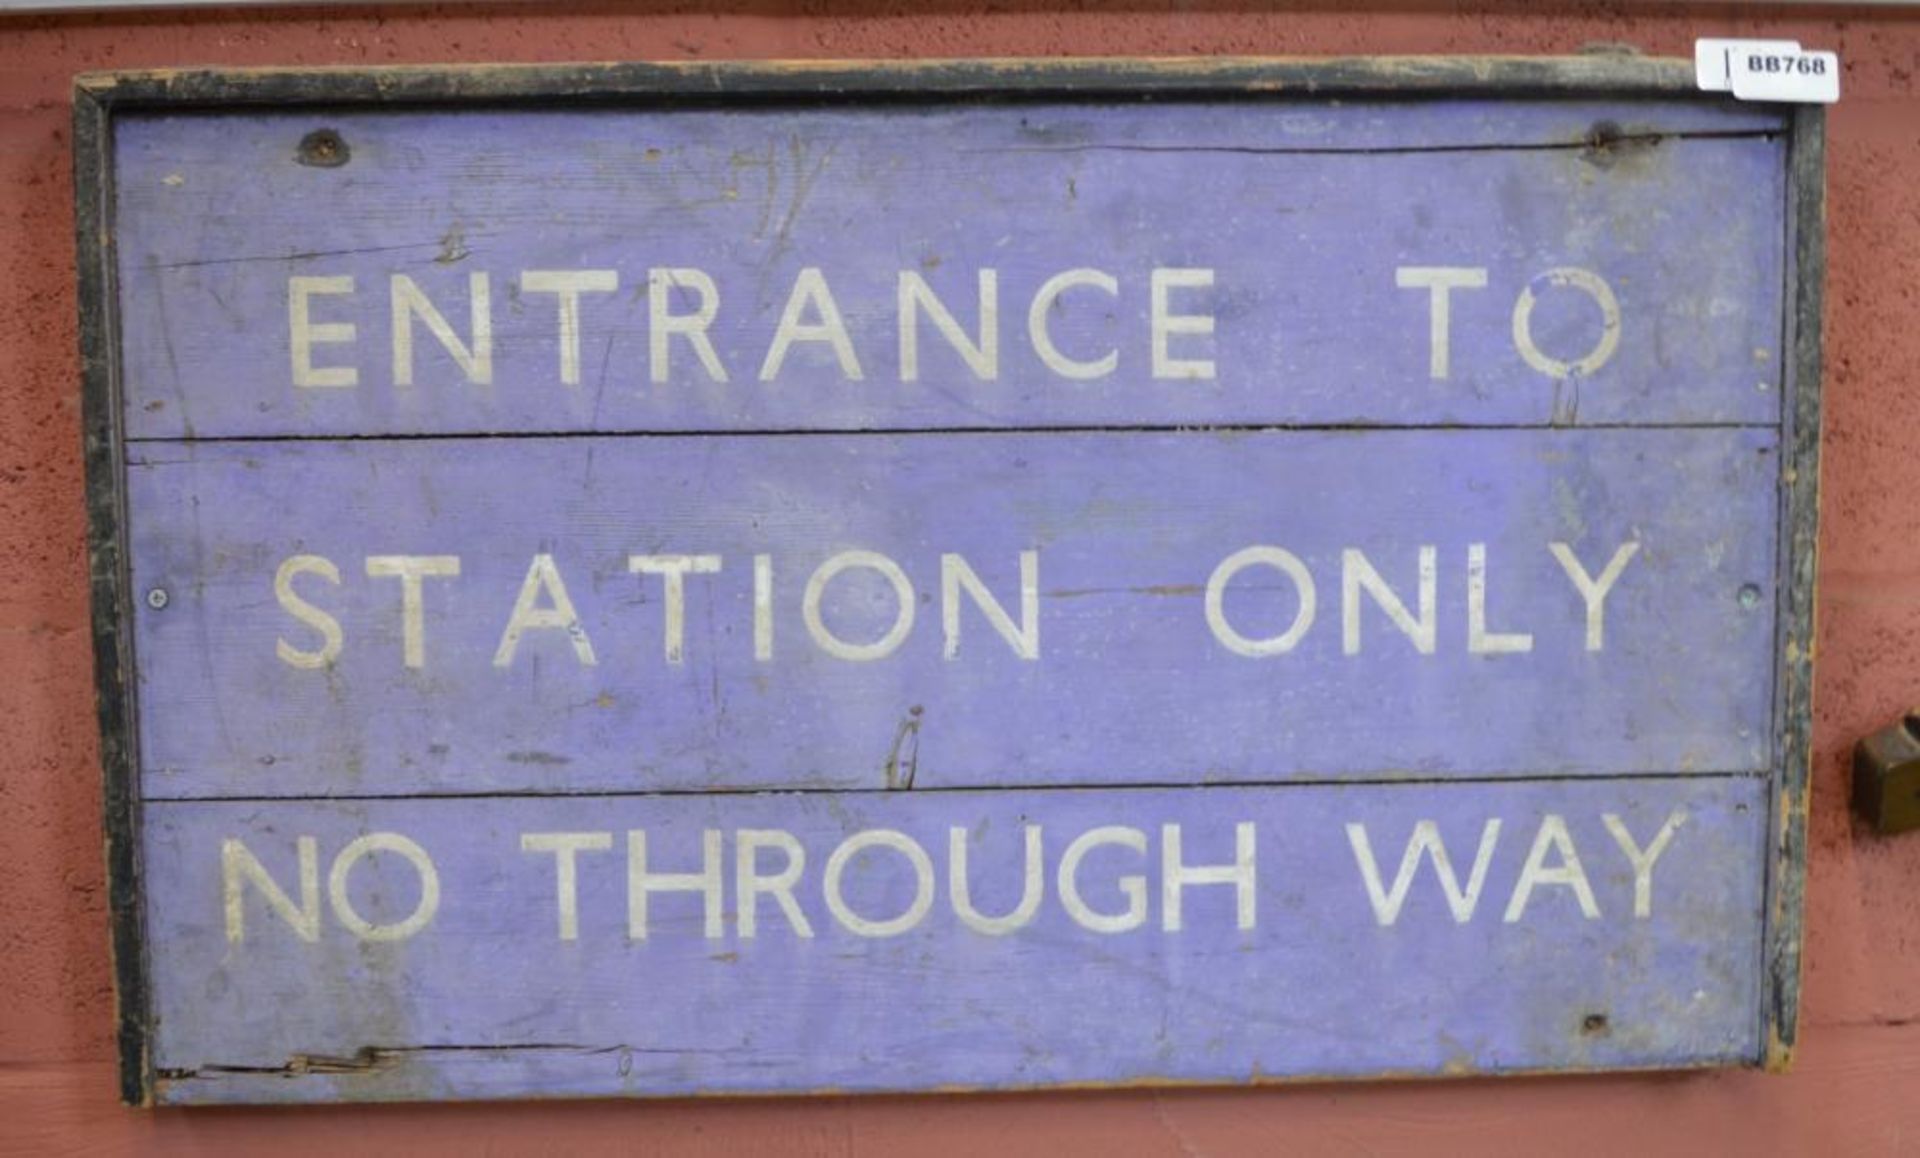 1 x Vintage Train Signage - Entrance To Station Only No Through Way - 32 x 18 Inches - Ref BB768 - C